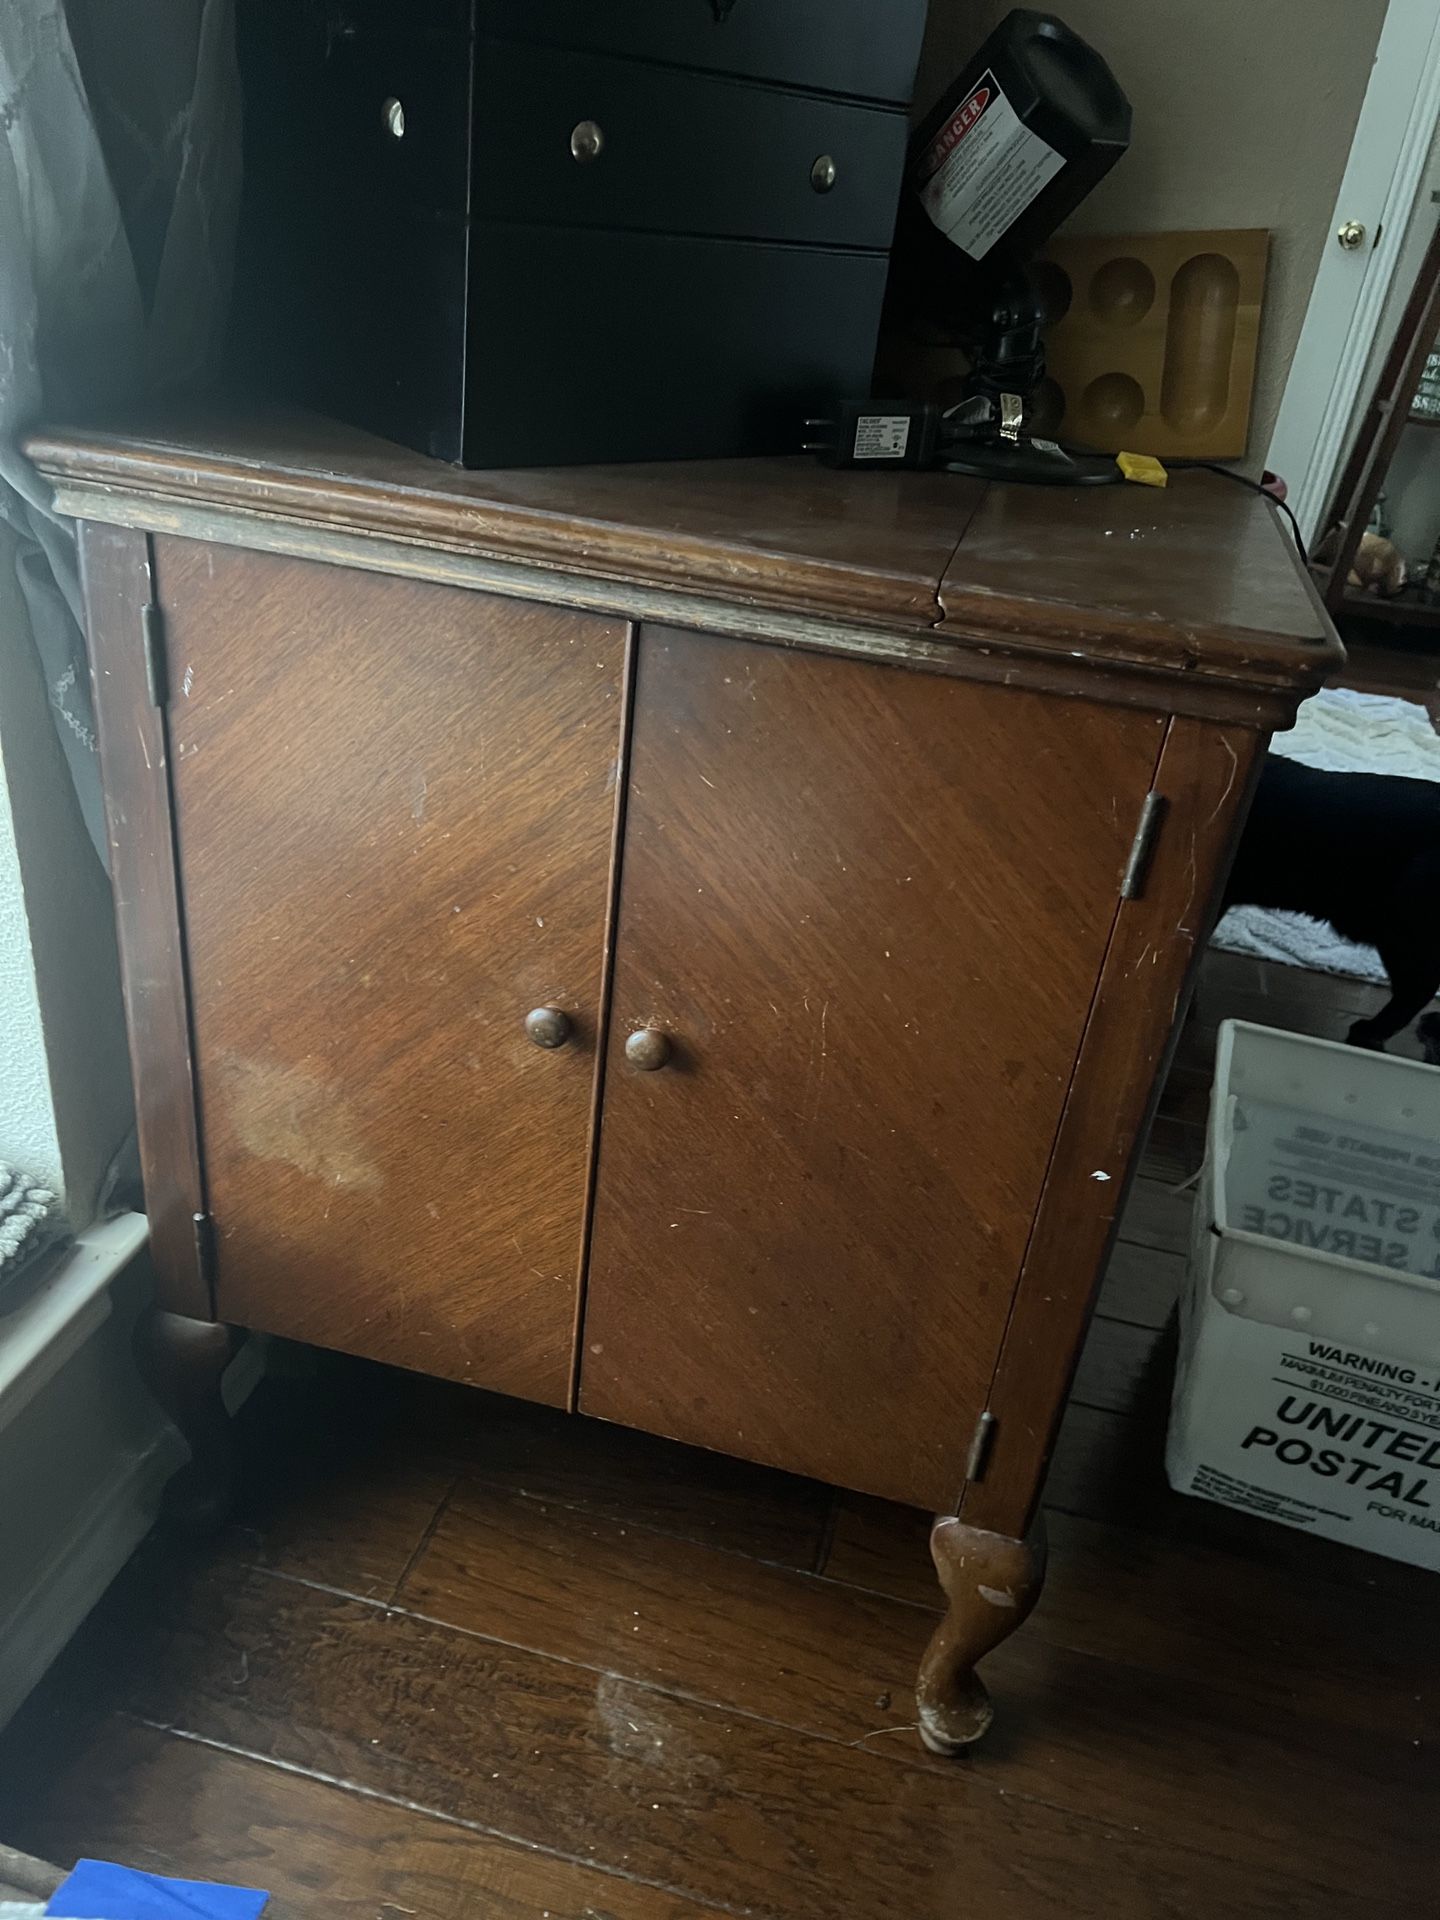 Antique Sewing Cabinet 